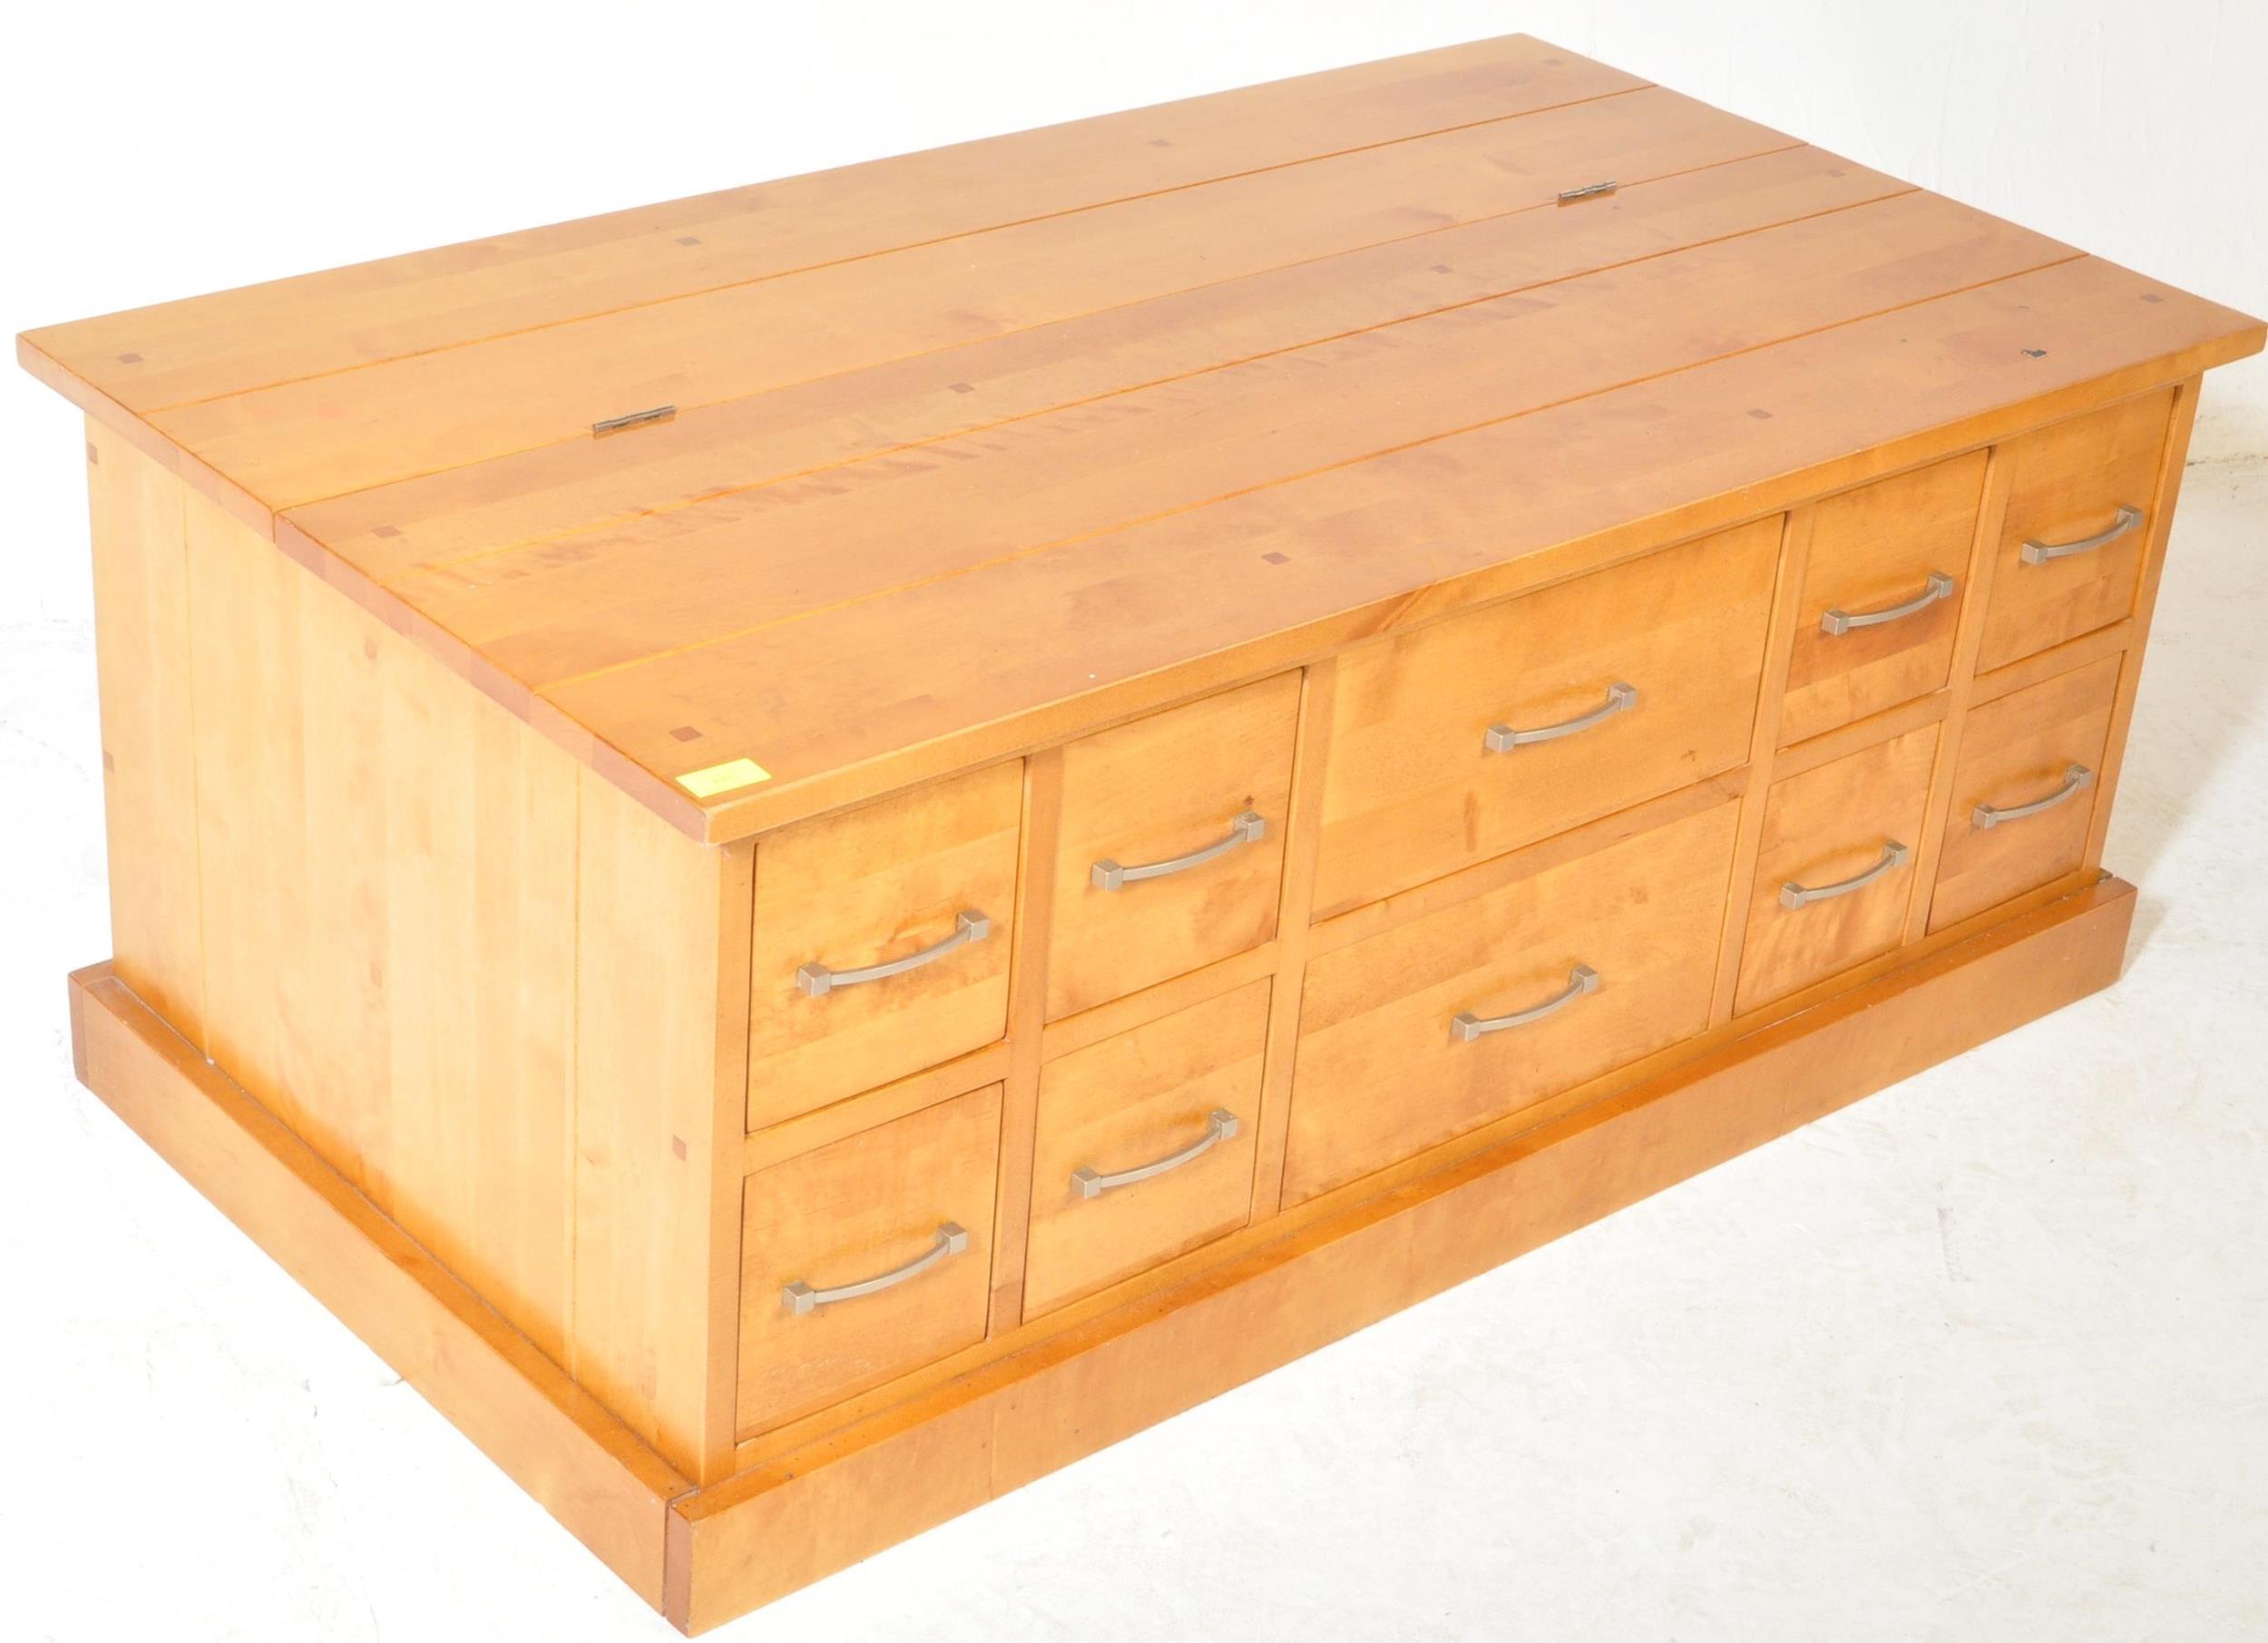 CONTEMPORARY MERCHANTS CHEST STYLE COFFEE TABLE - Image 2 of 6